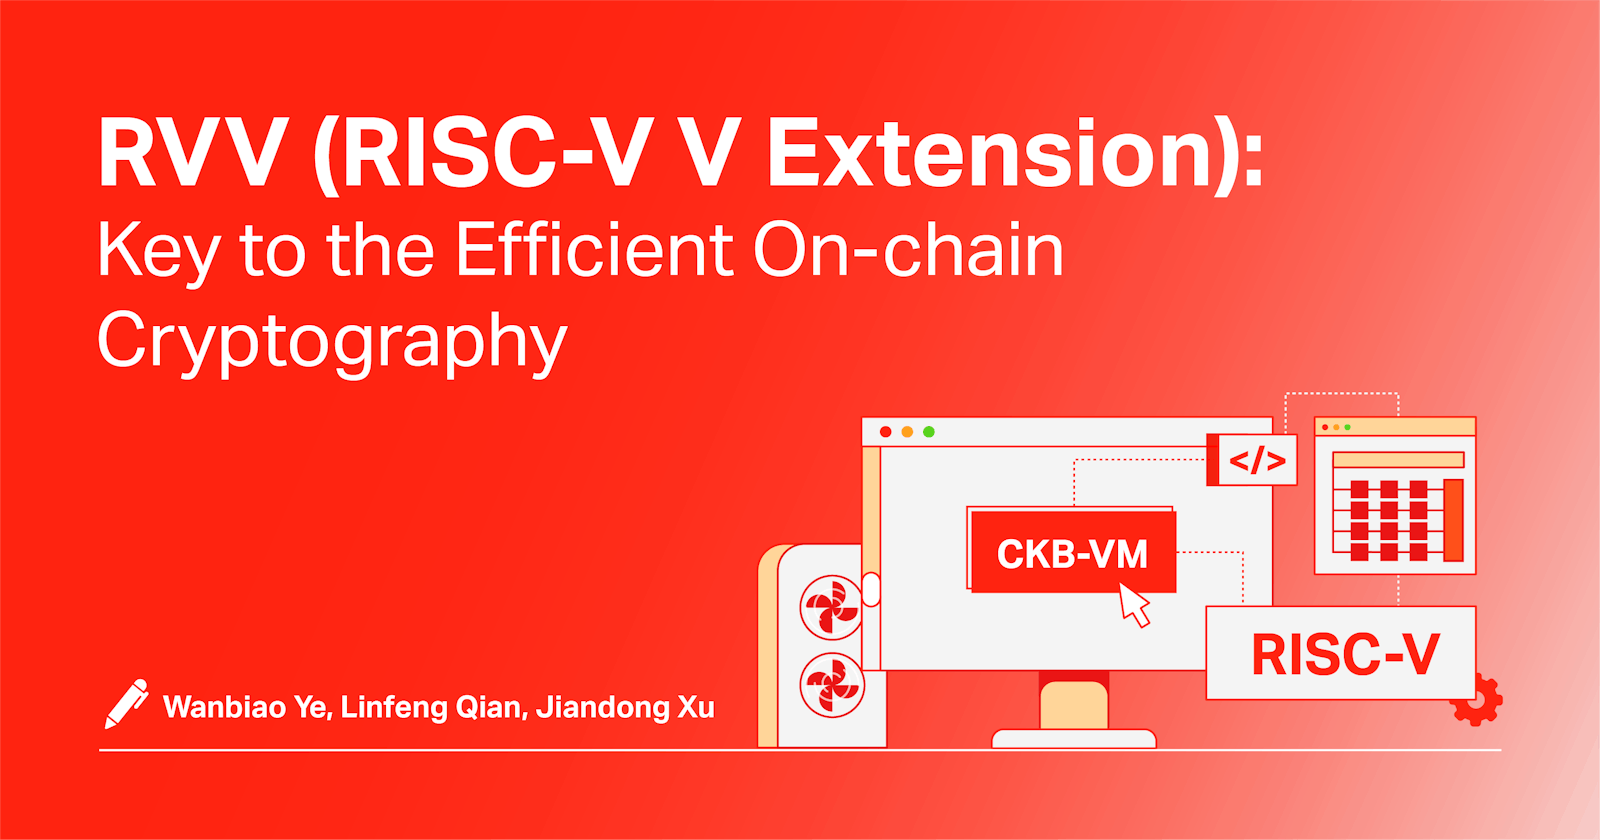 RVV (RISC-V V Extension): Key to the Efficient On-Chain Cryptography